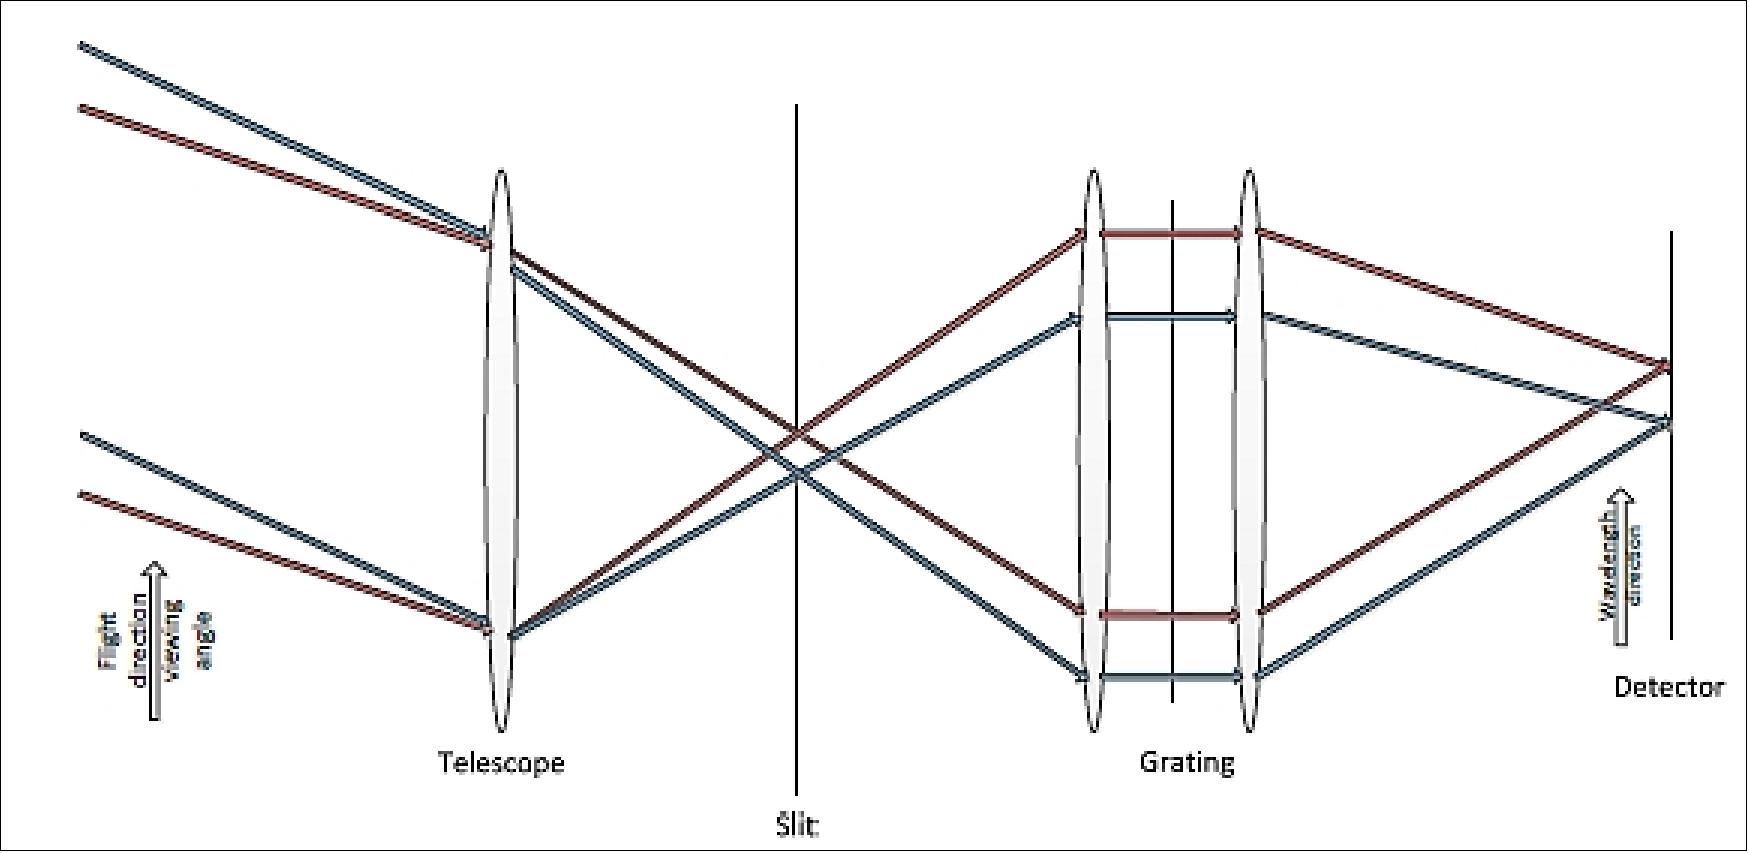 Figure 108: Basic pushbroom spectrograph showing how flight direction spatial information on the left is transferred to the spectral response function on the right; color separation from the grating is left out of the graph